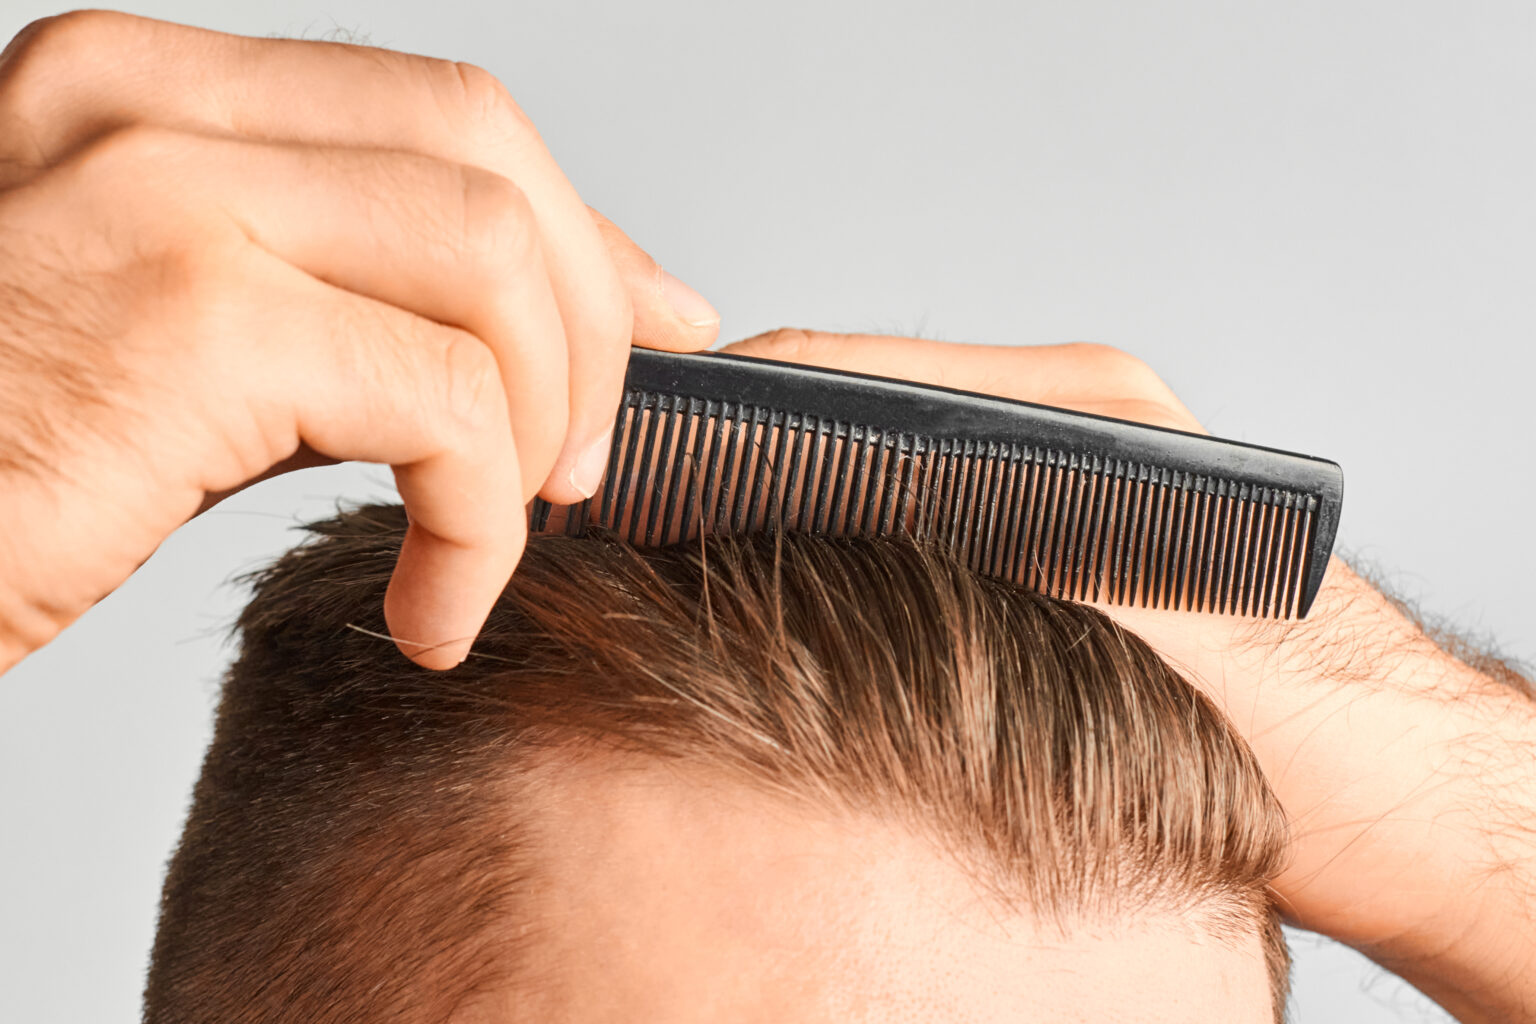 A man combing his hair with a comb